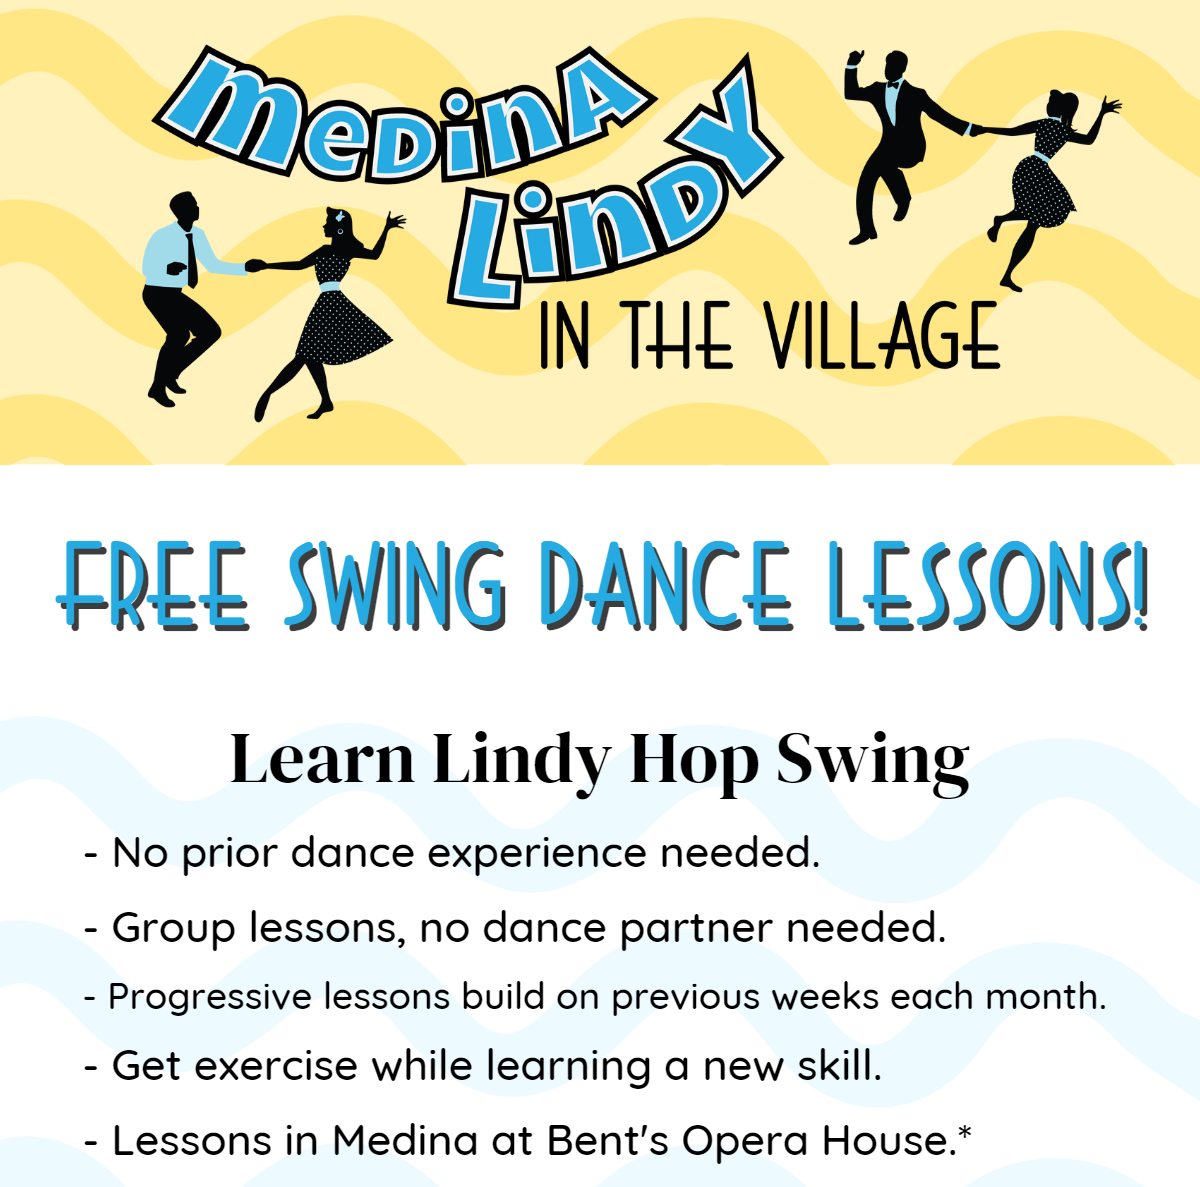 Lindy Hop Lessons - Medina Lindy in the Village